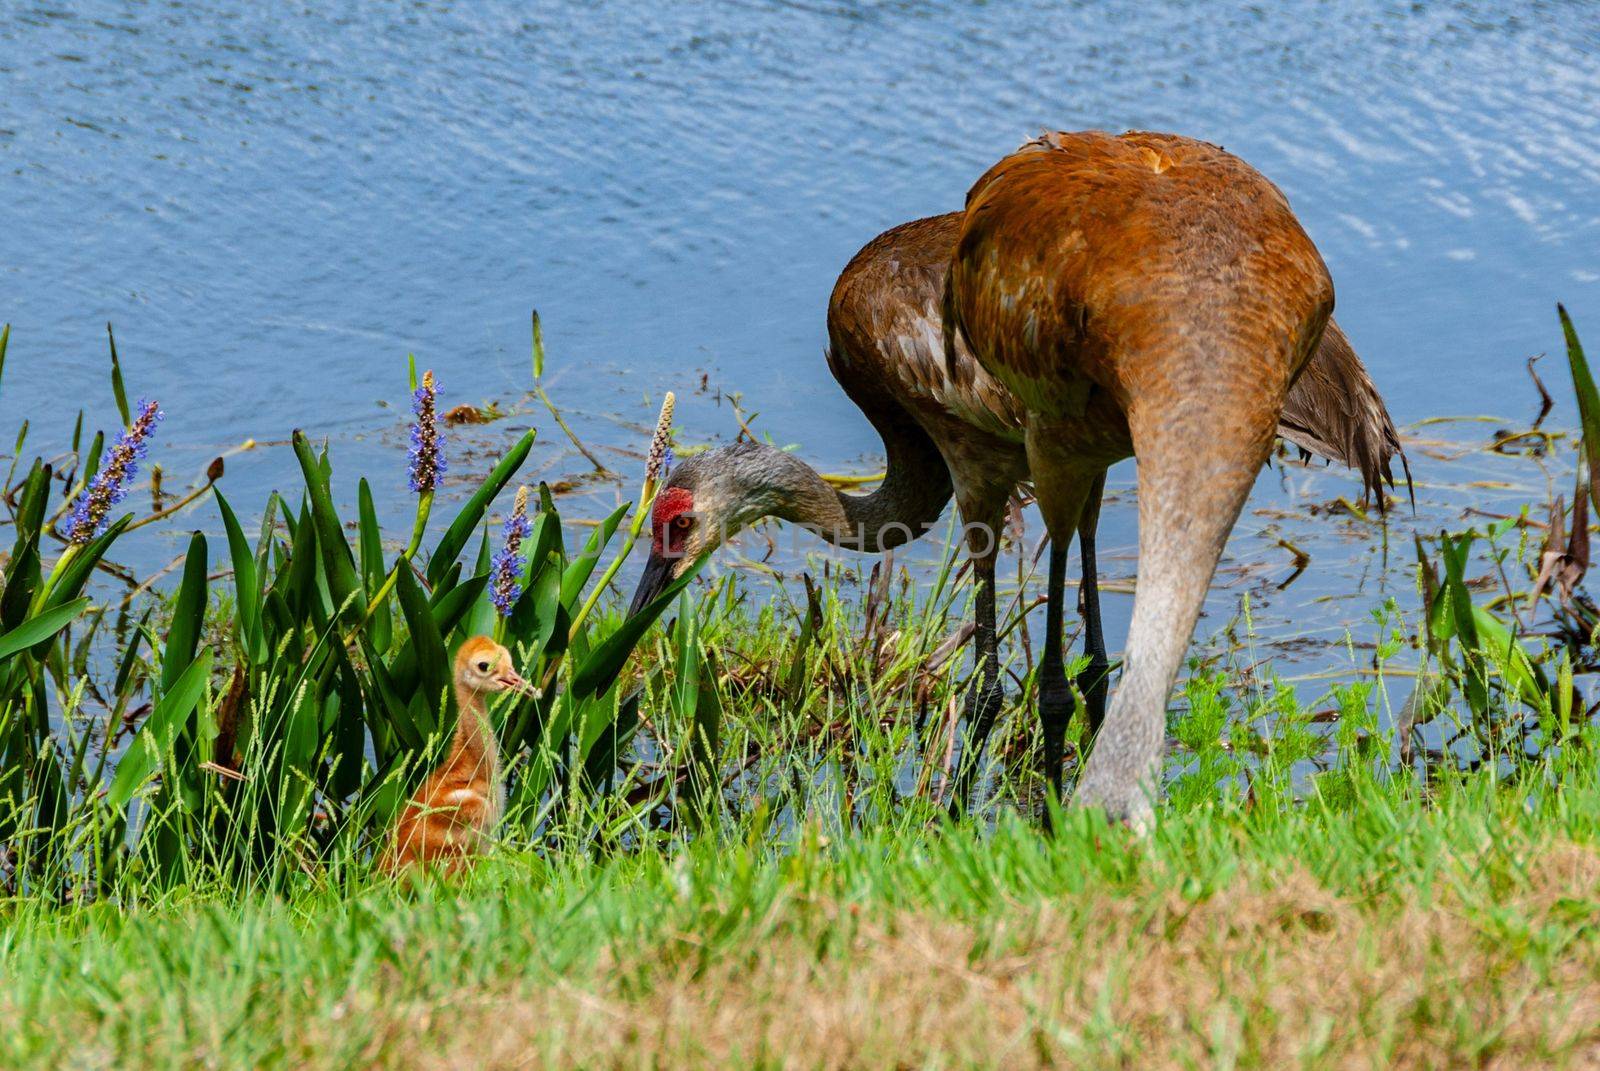 Sandhill crane with chick (Grus canadensis), Florida, United States Red headed